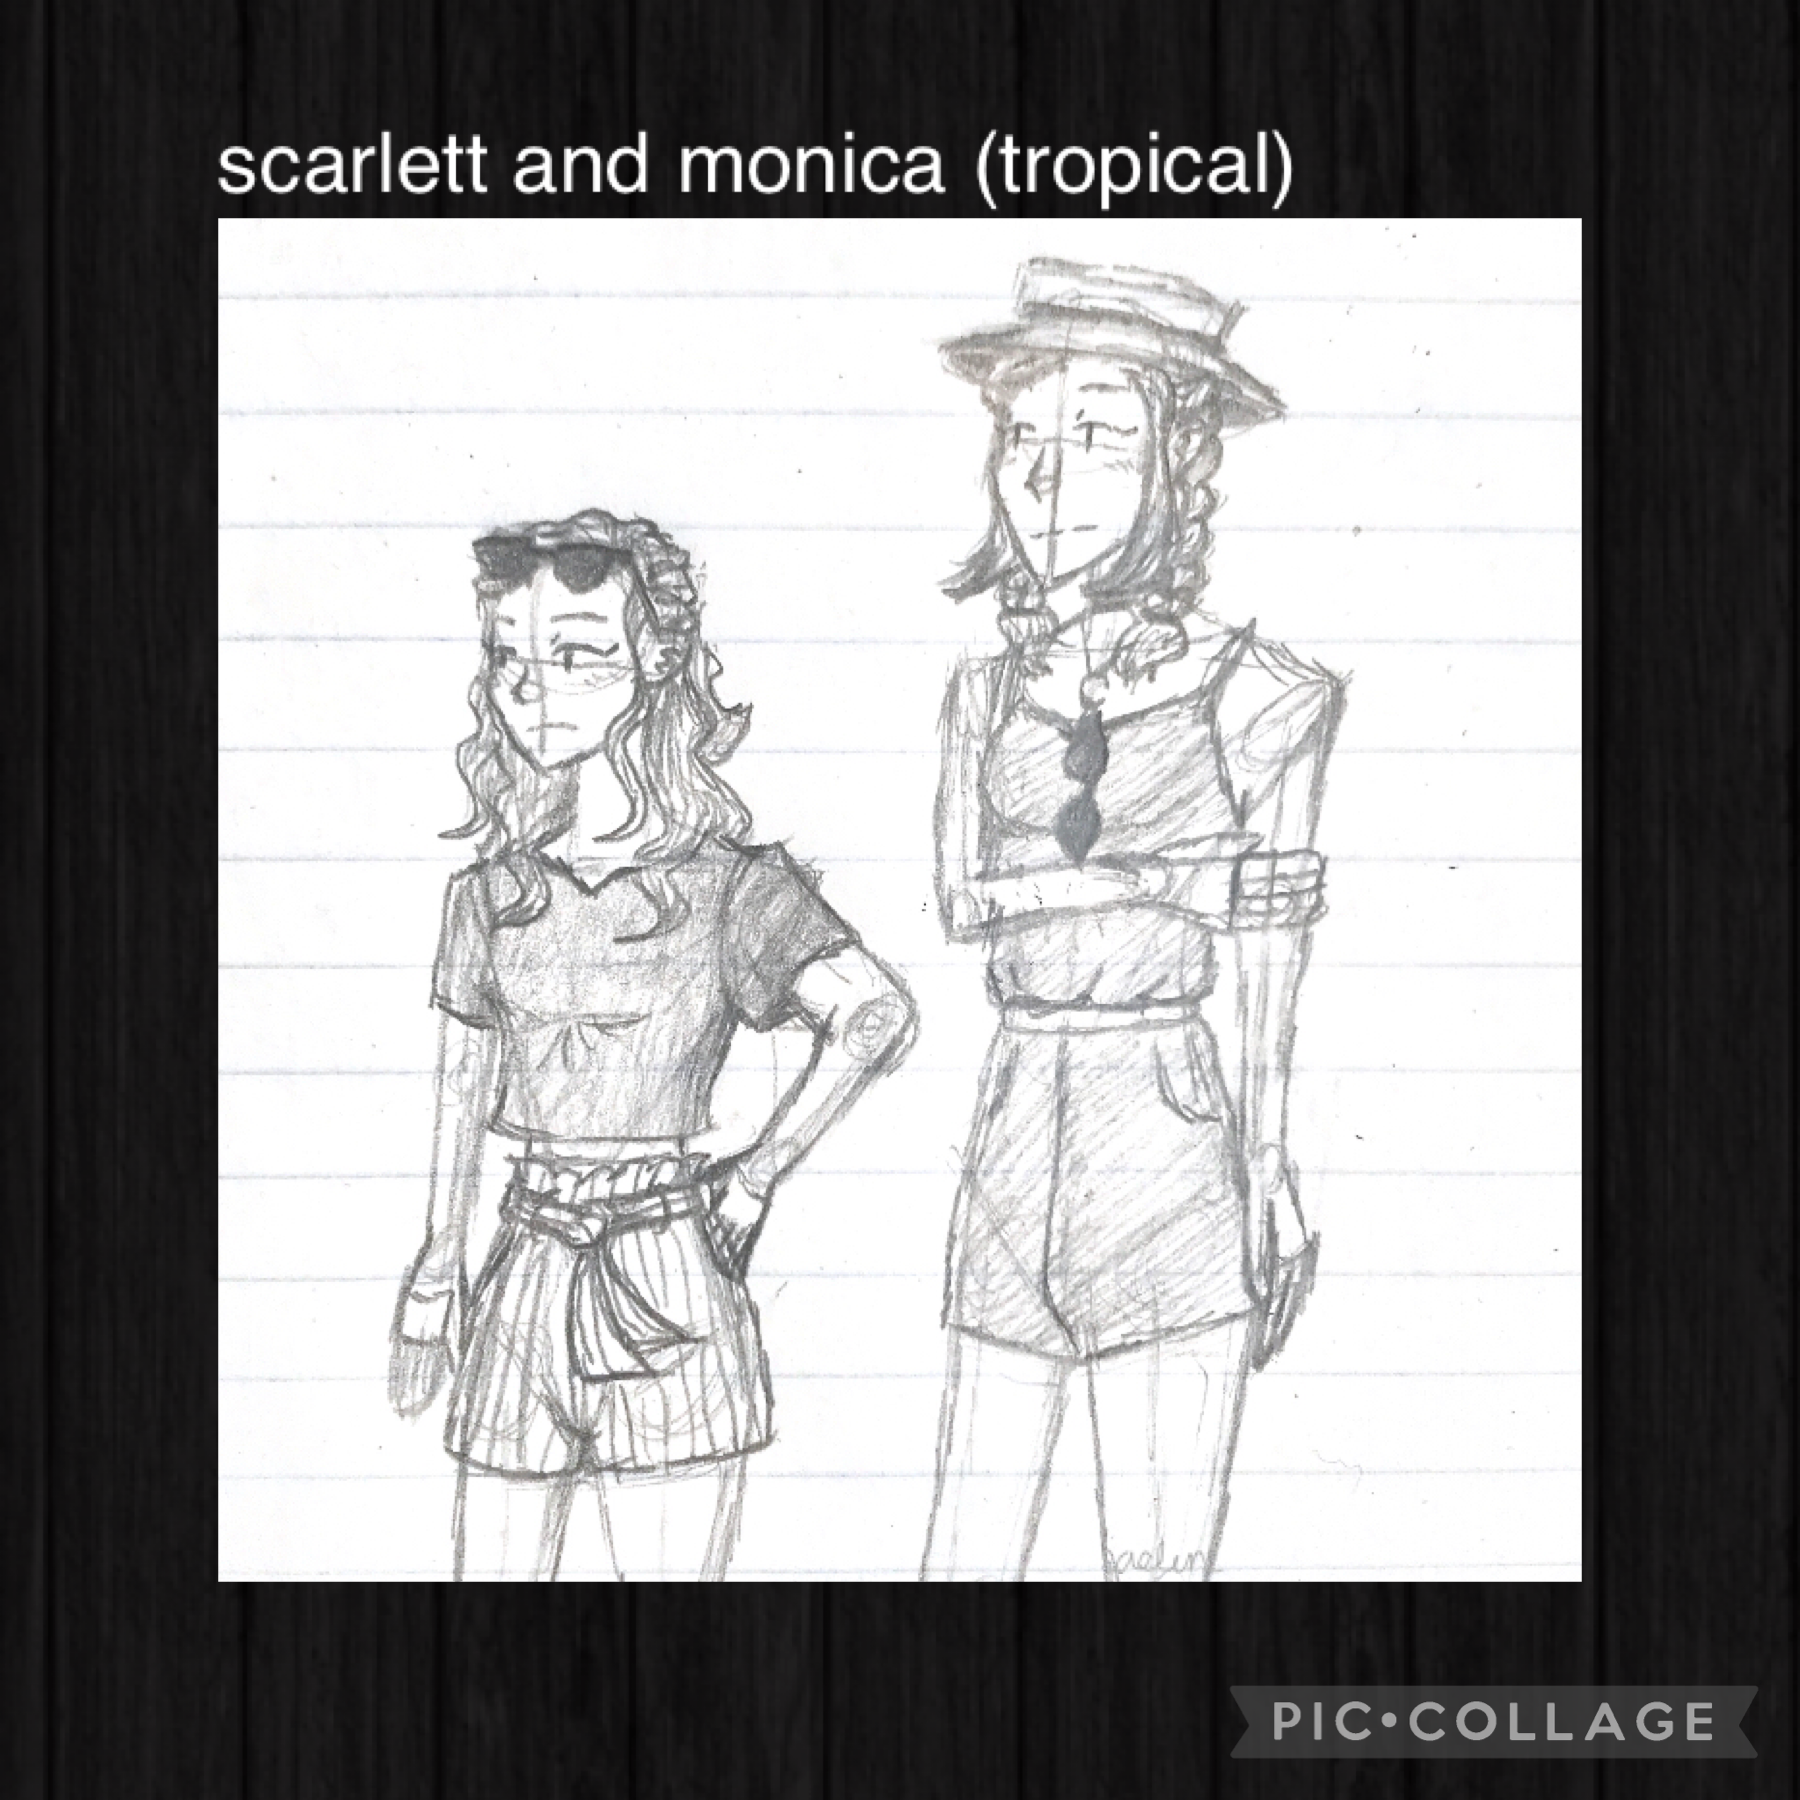 can u tell I drew scarlett 1st lmaø (tap)

it’s like -10 degrees fahrenheit where I live and that’s pretty gross so I drew scarlett and monica in summer outfits to cope lol.